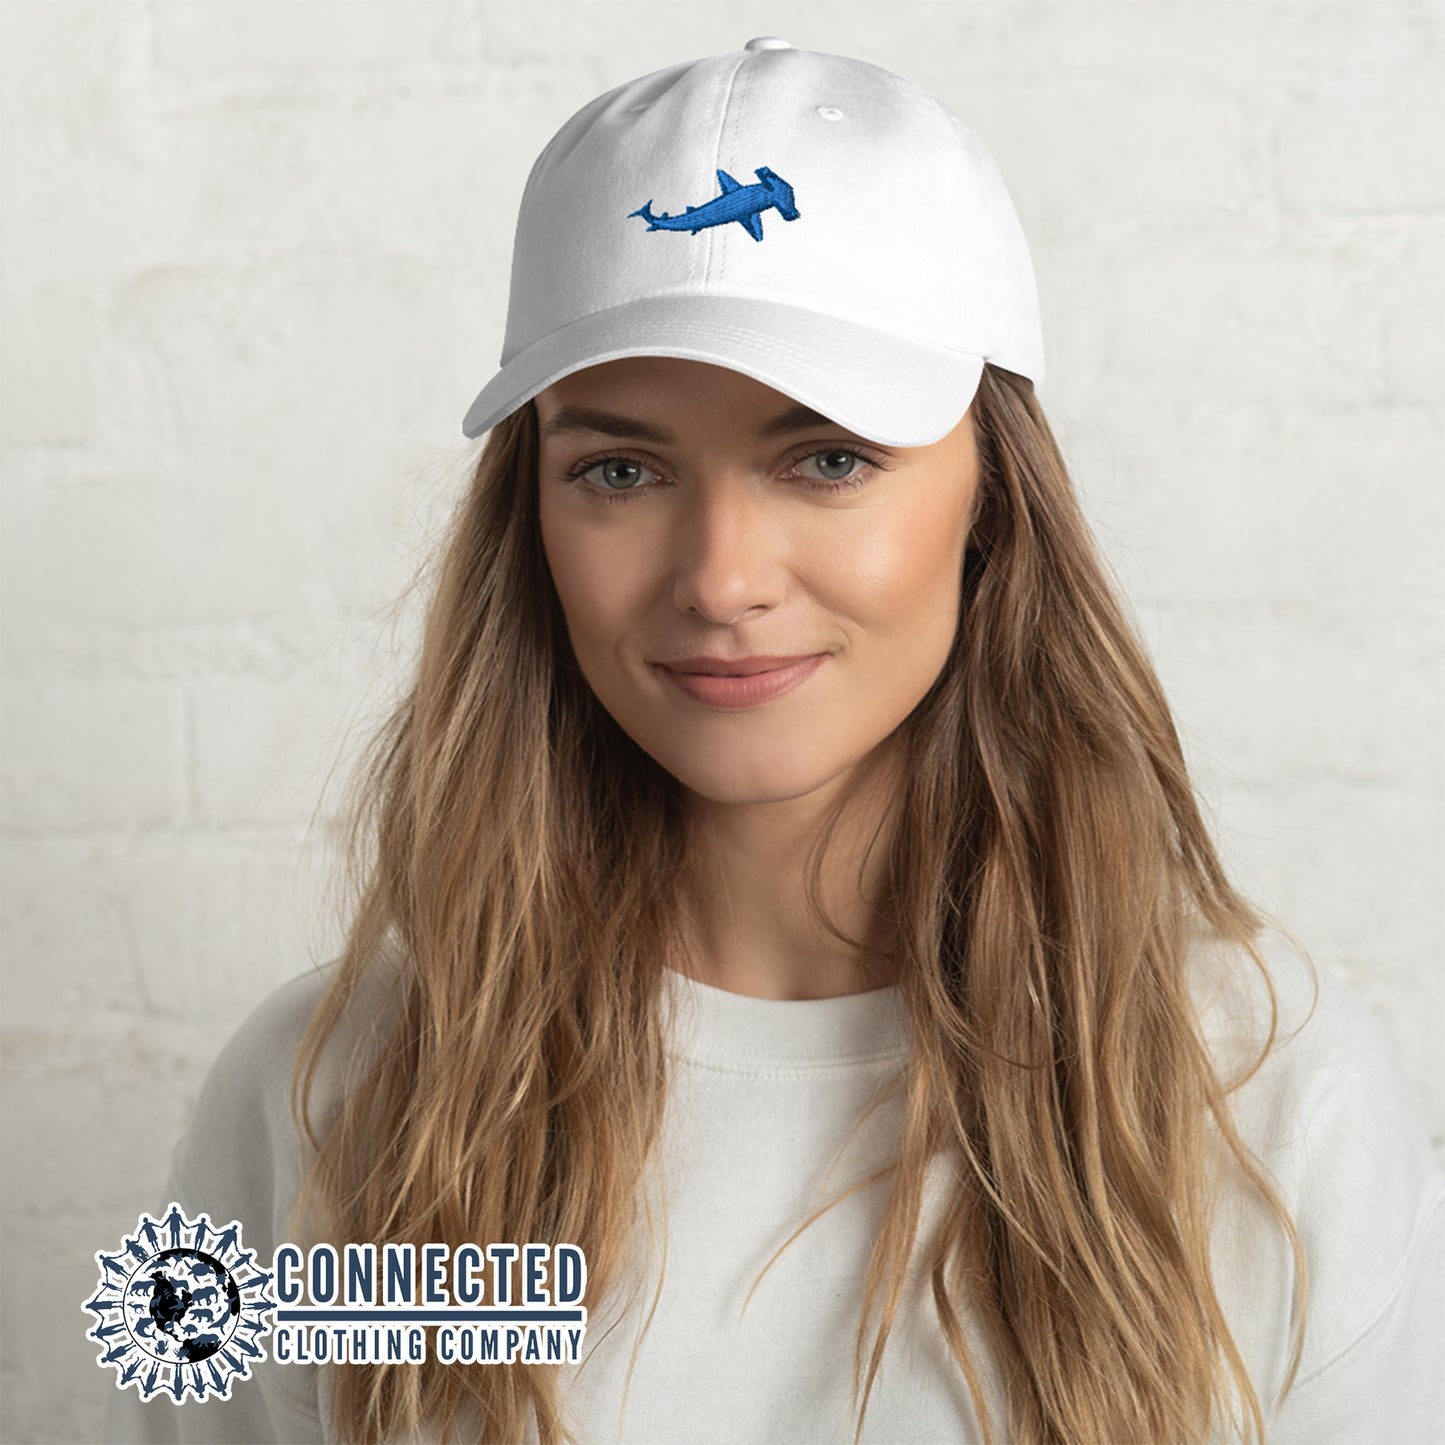 Model Wearing White Hammerhead Shark Cotton Cap - Connected Clothing Company - Ethical & Sustainable Clothing That Gives Back - 10% donated to Oceana shark conservation